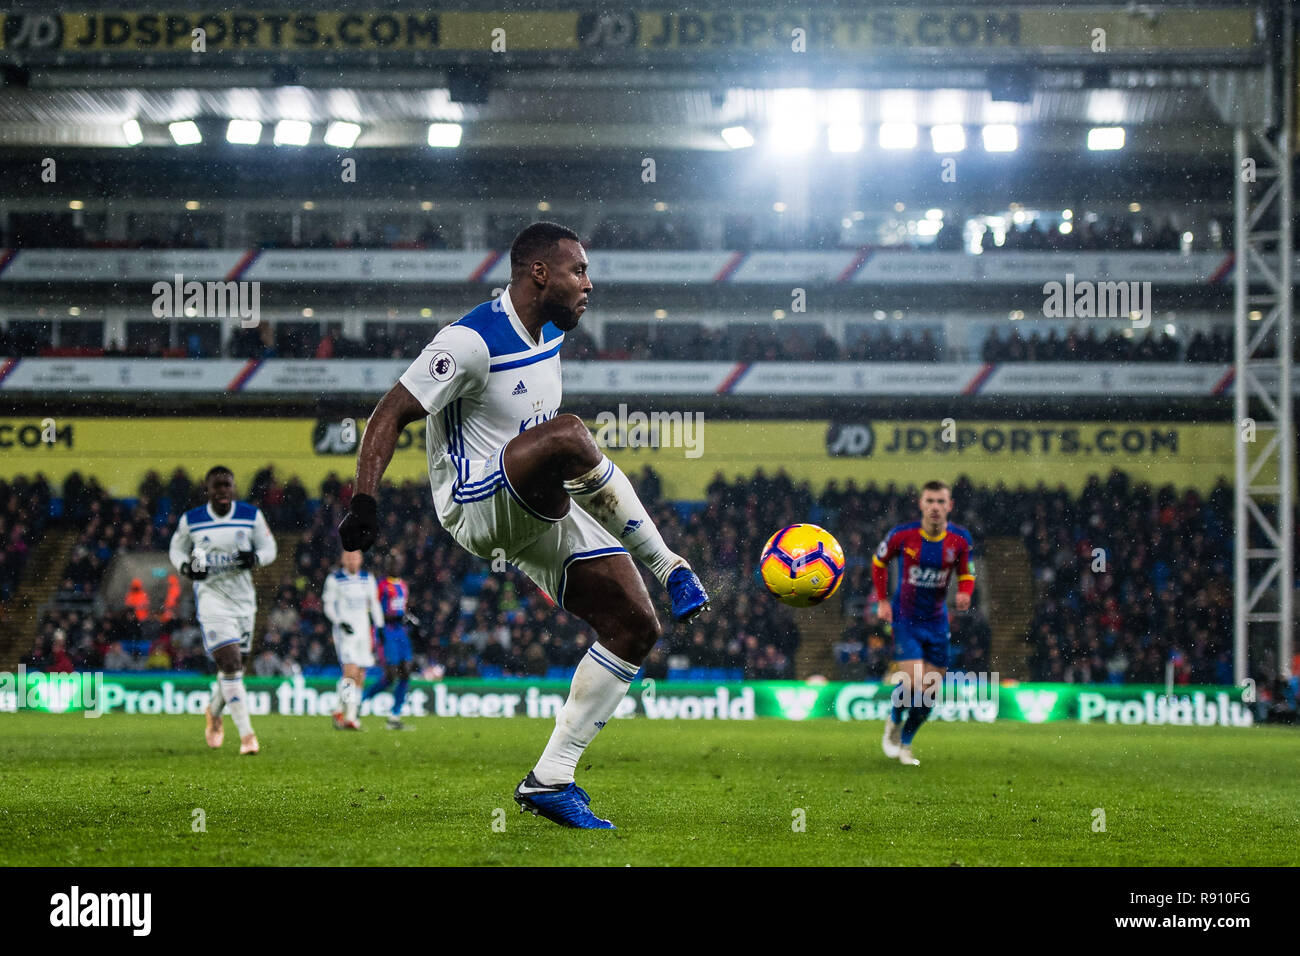 LONDON, ENGLAND - DECEMBER 15: Wilfred Ndidi of Leicester City looks on during the Premier League match between Crystal Palace and Leicester City at Selhurst Park on December 15, 2018 in London, United Kingdom. (Photo by MB Media) Stock Photo